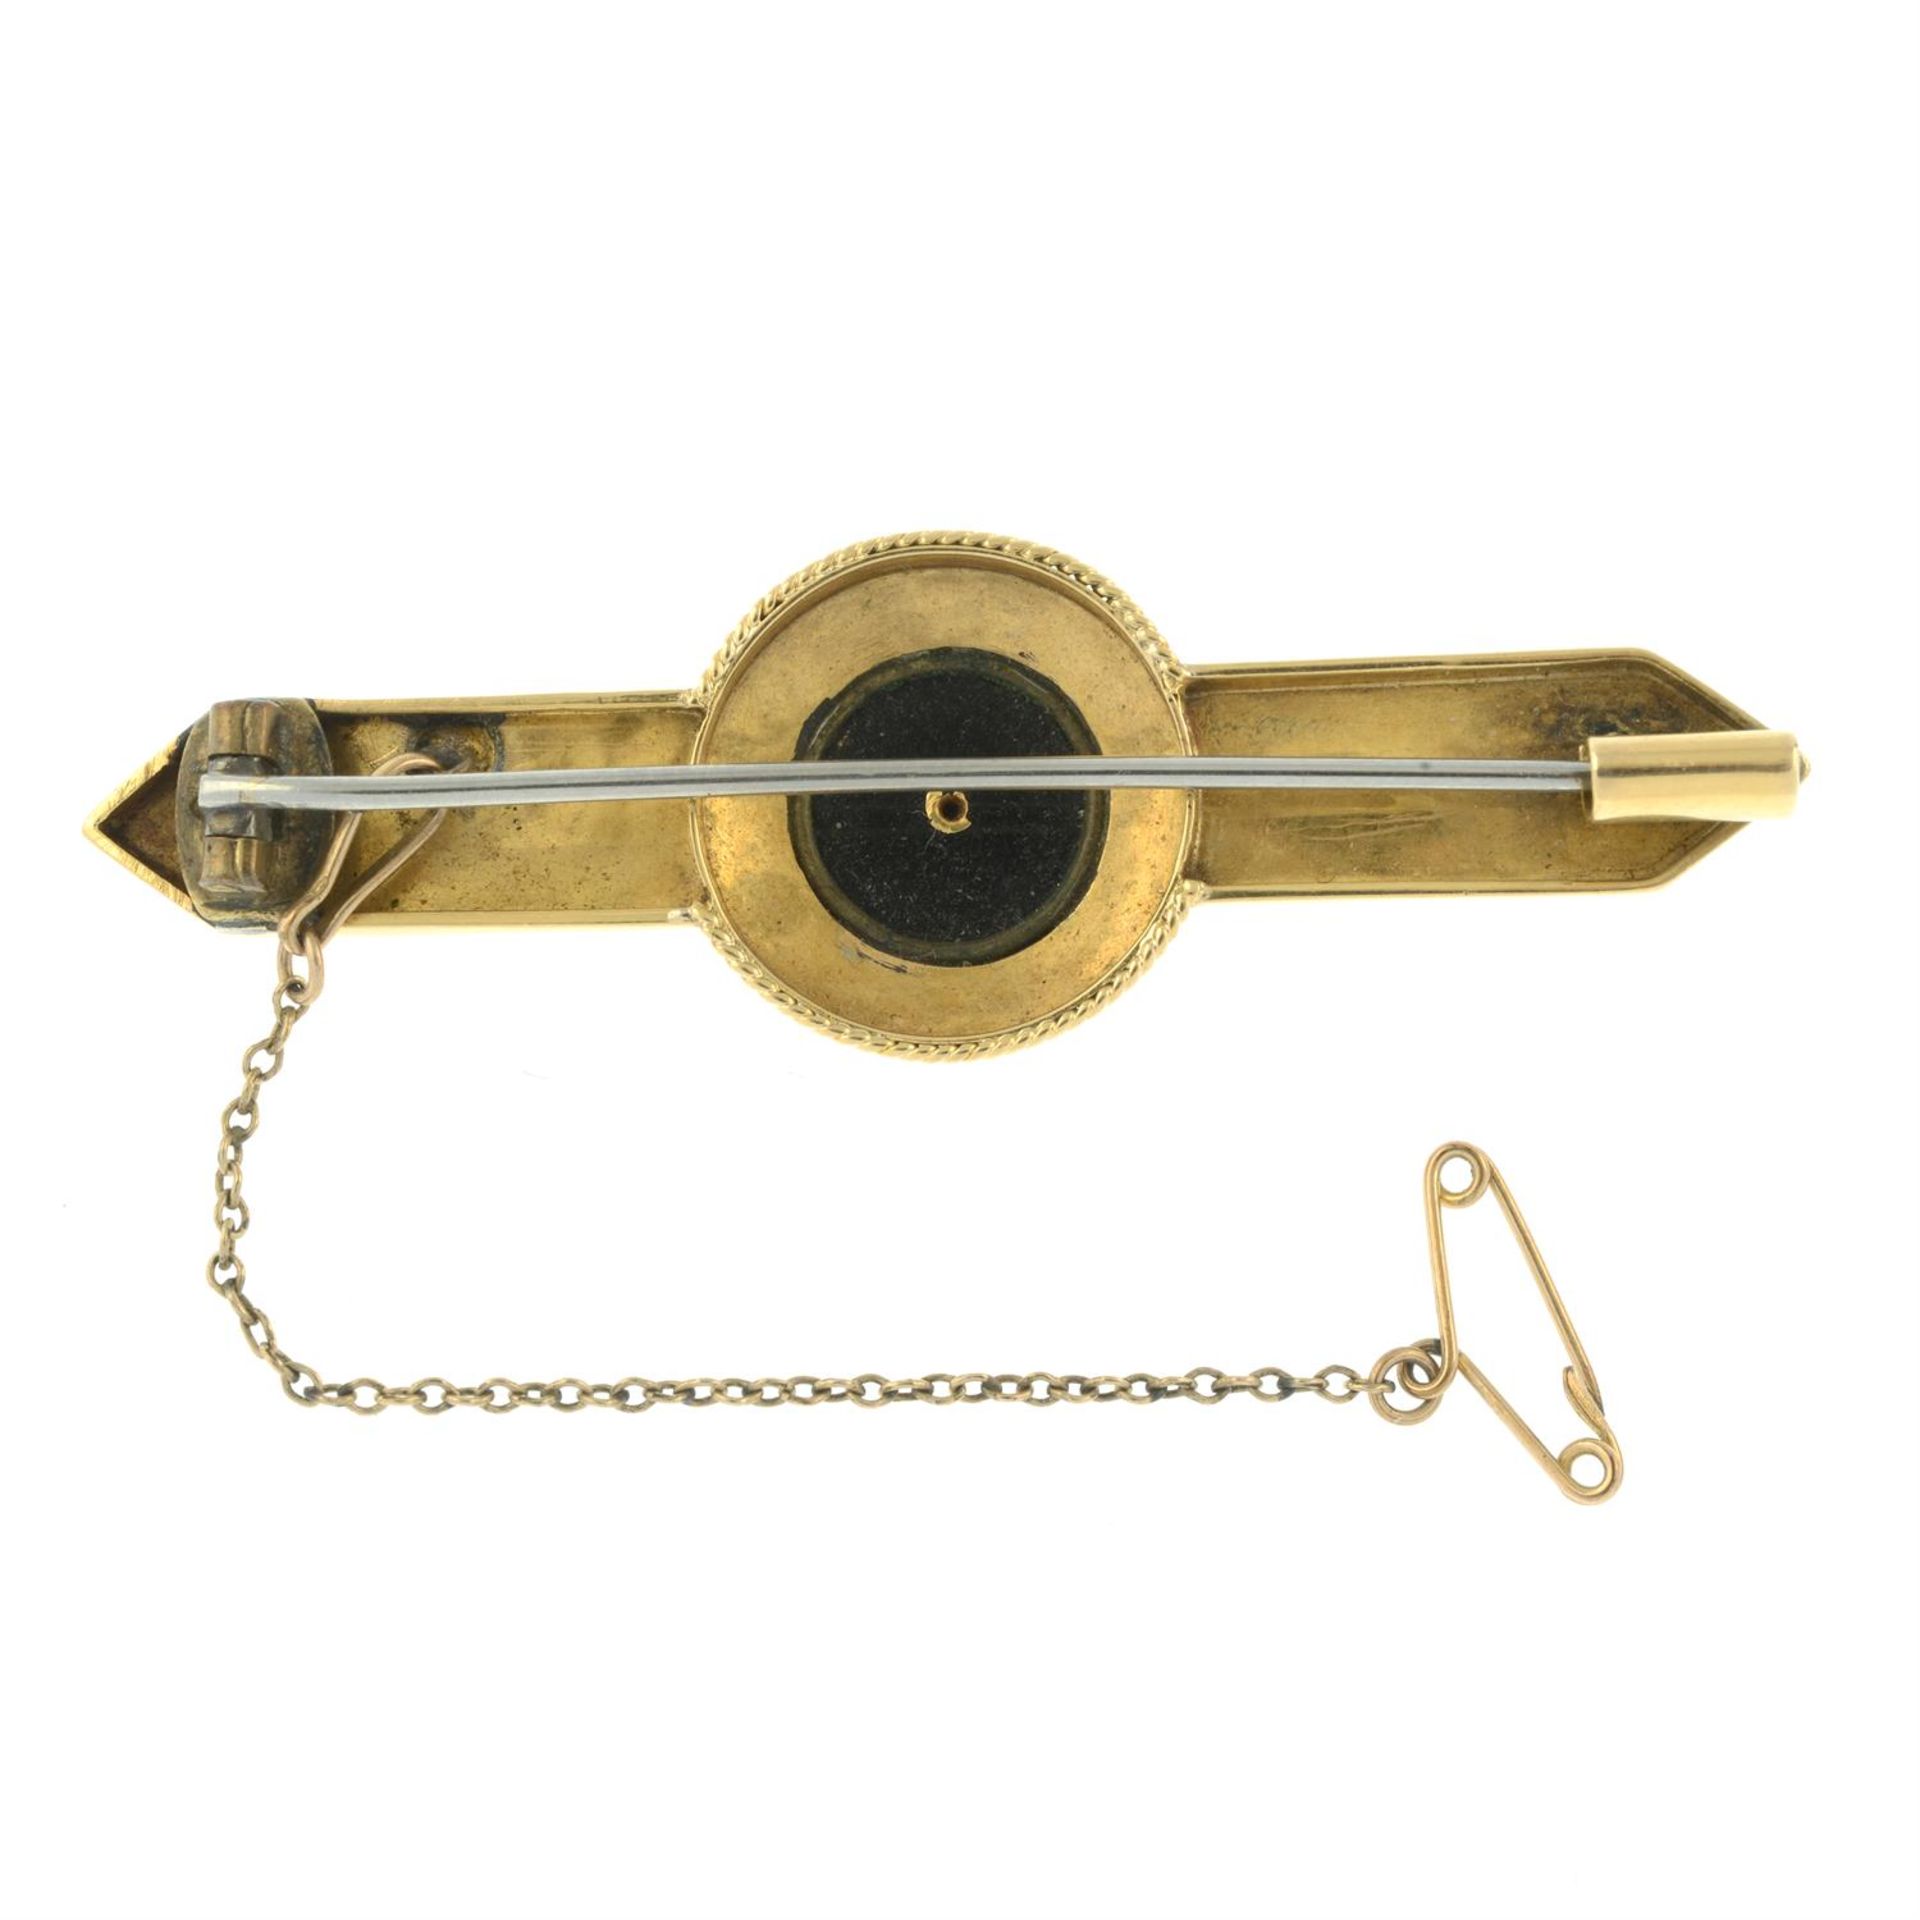 Early 20th century 18ct gold onyx & split pearl bar brooch - Image 2 of 2